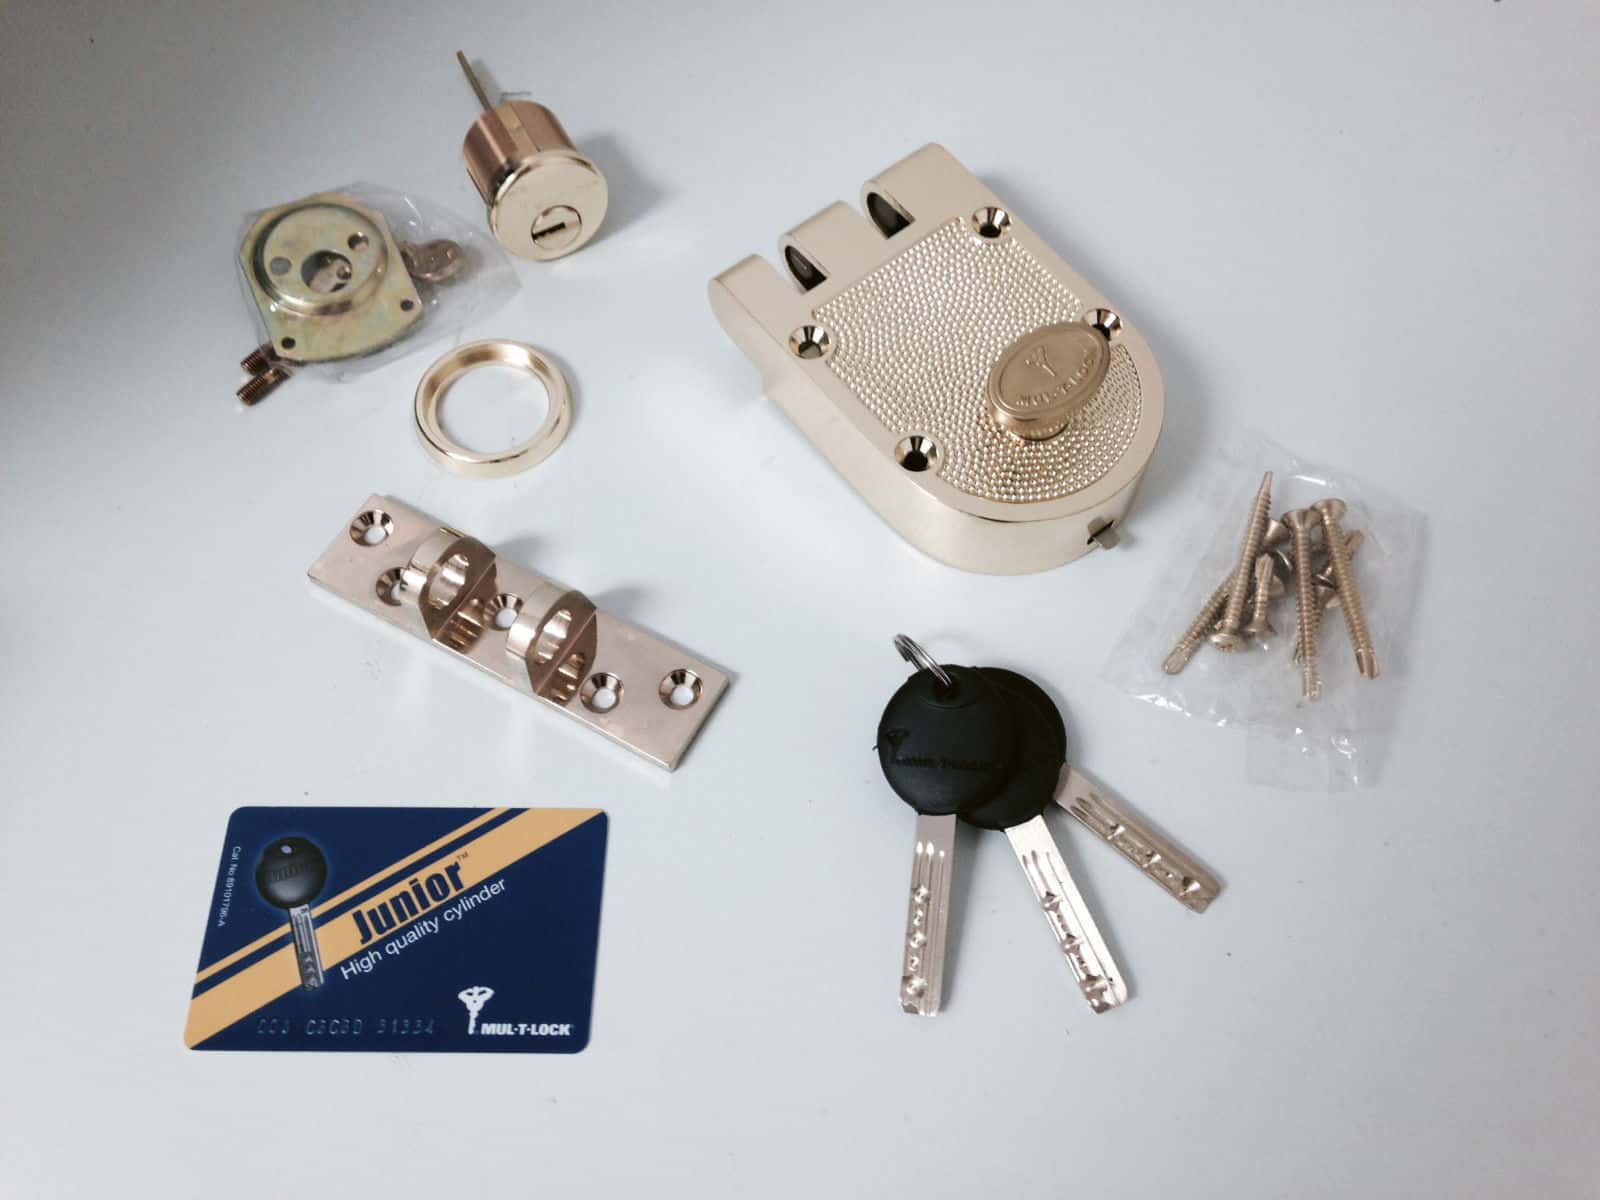 What to know about the locksmith company